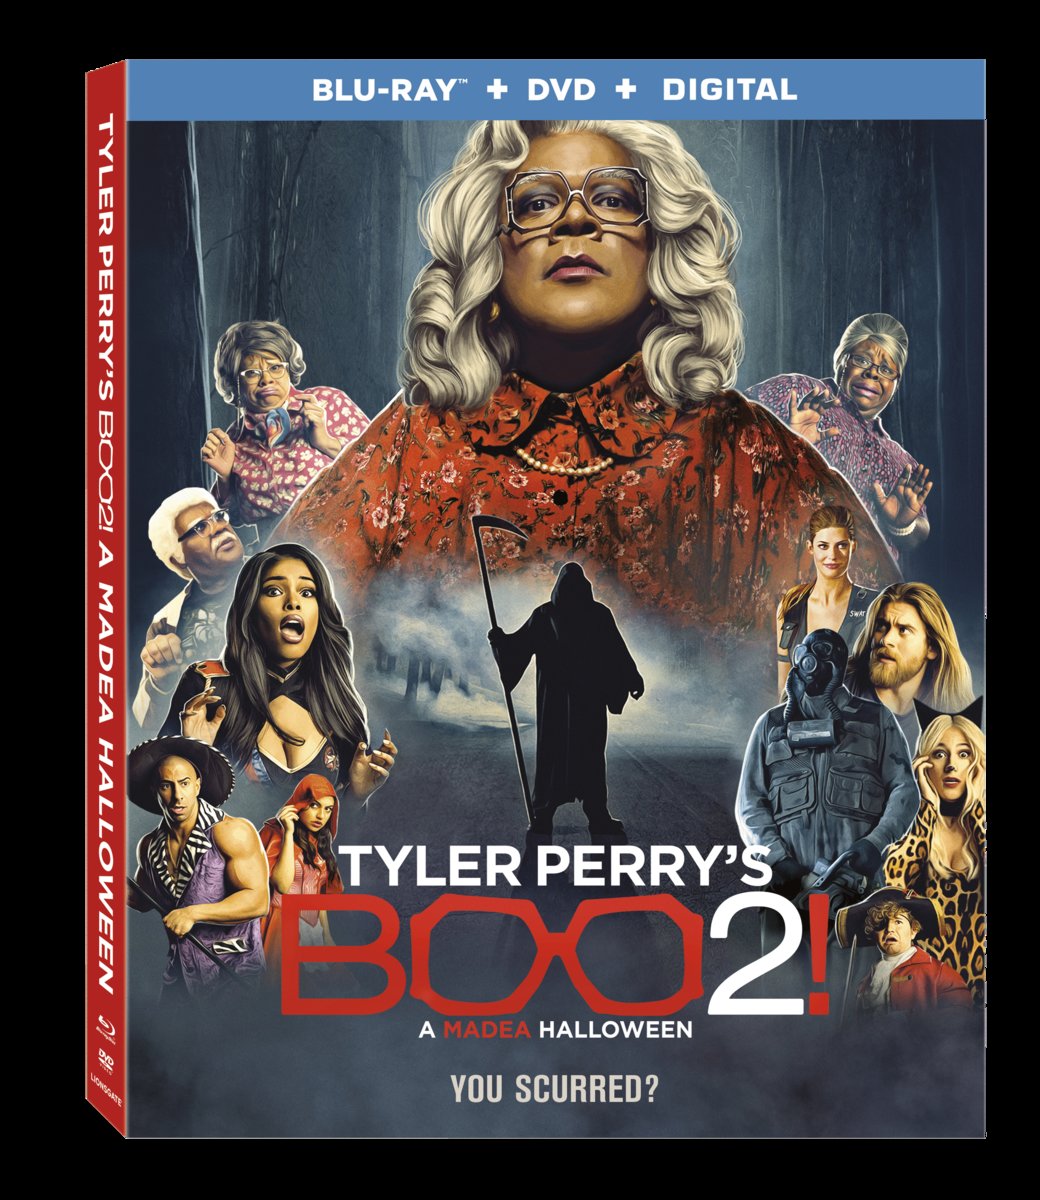 Tyler Perry's Boo 2! A Madea Halloween Blu-Ray Combo Cover (Lionsgagte Home Entertainment)